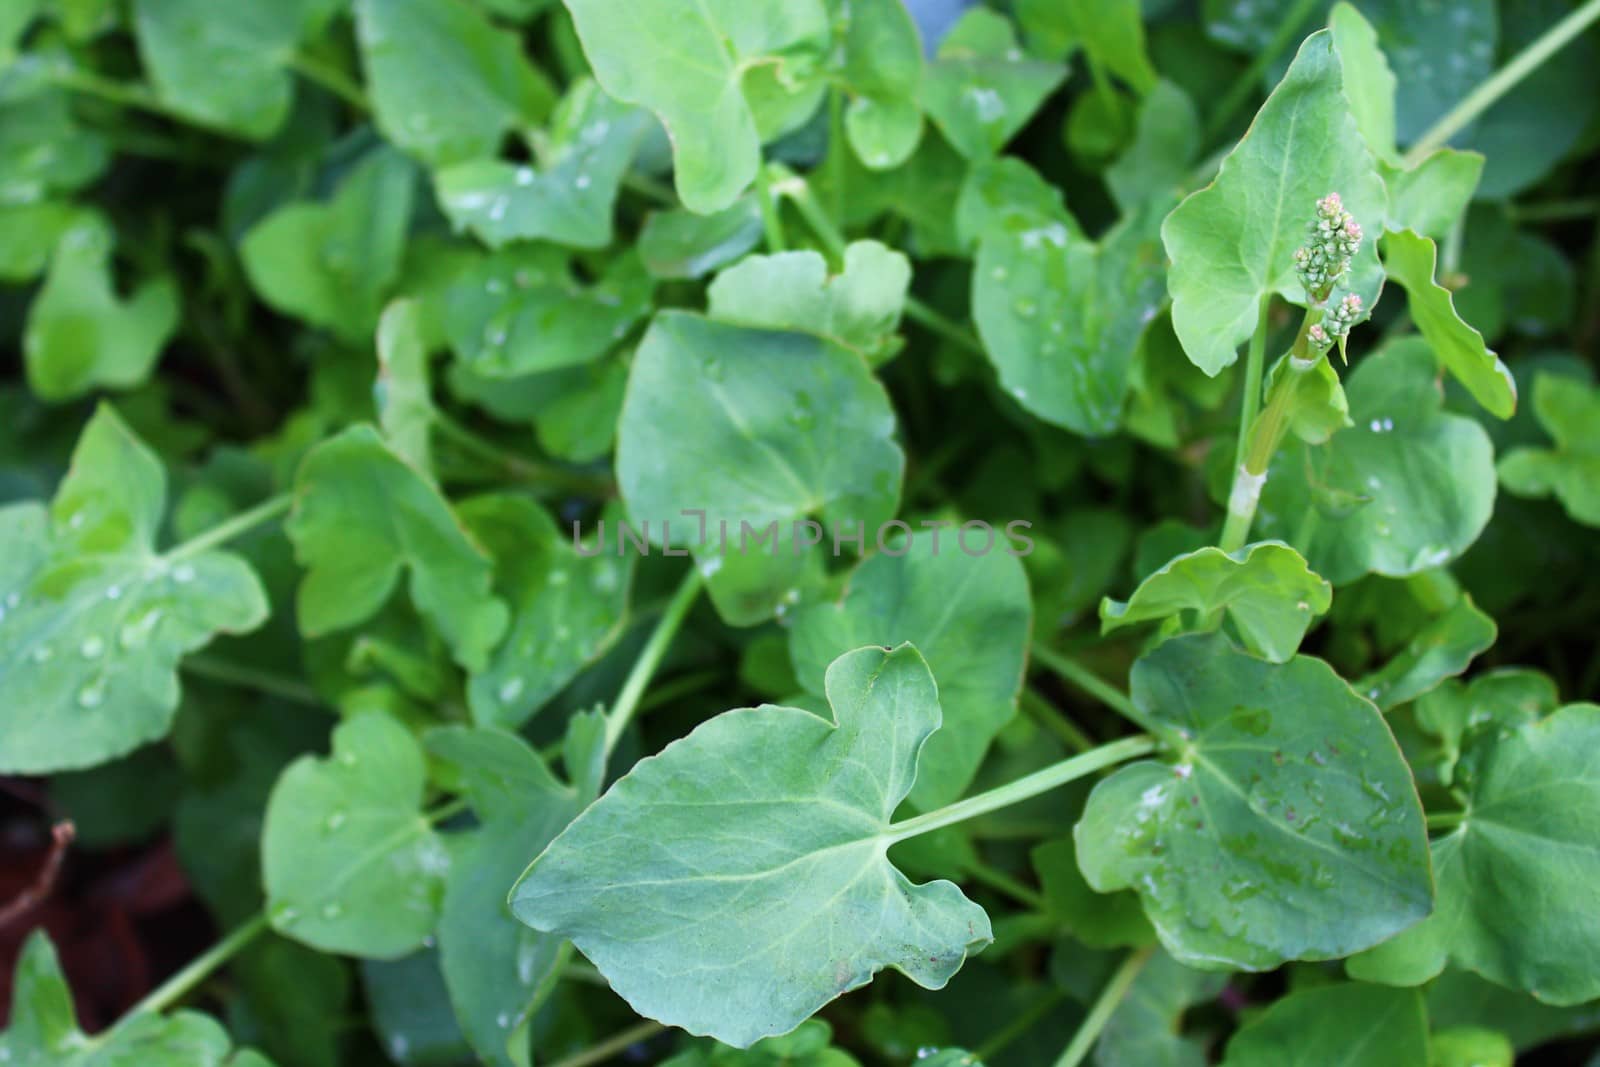 The picture shows french sorrel in the garden